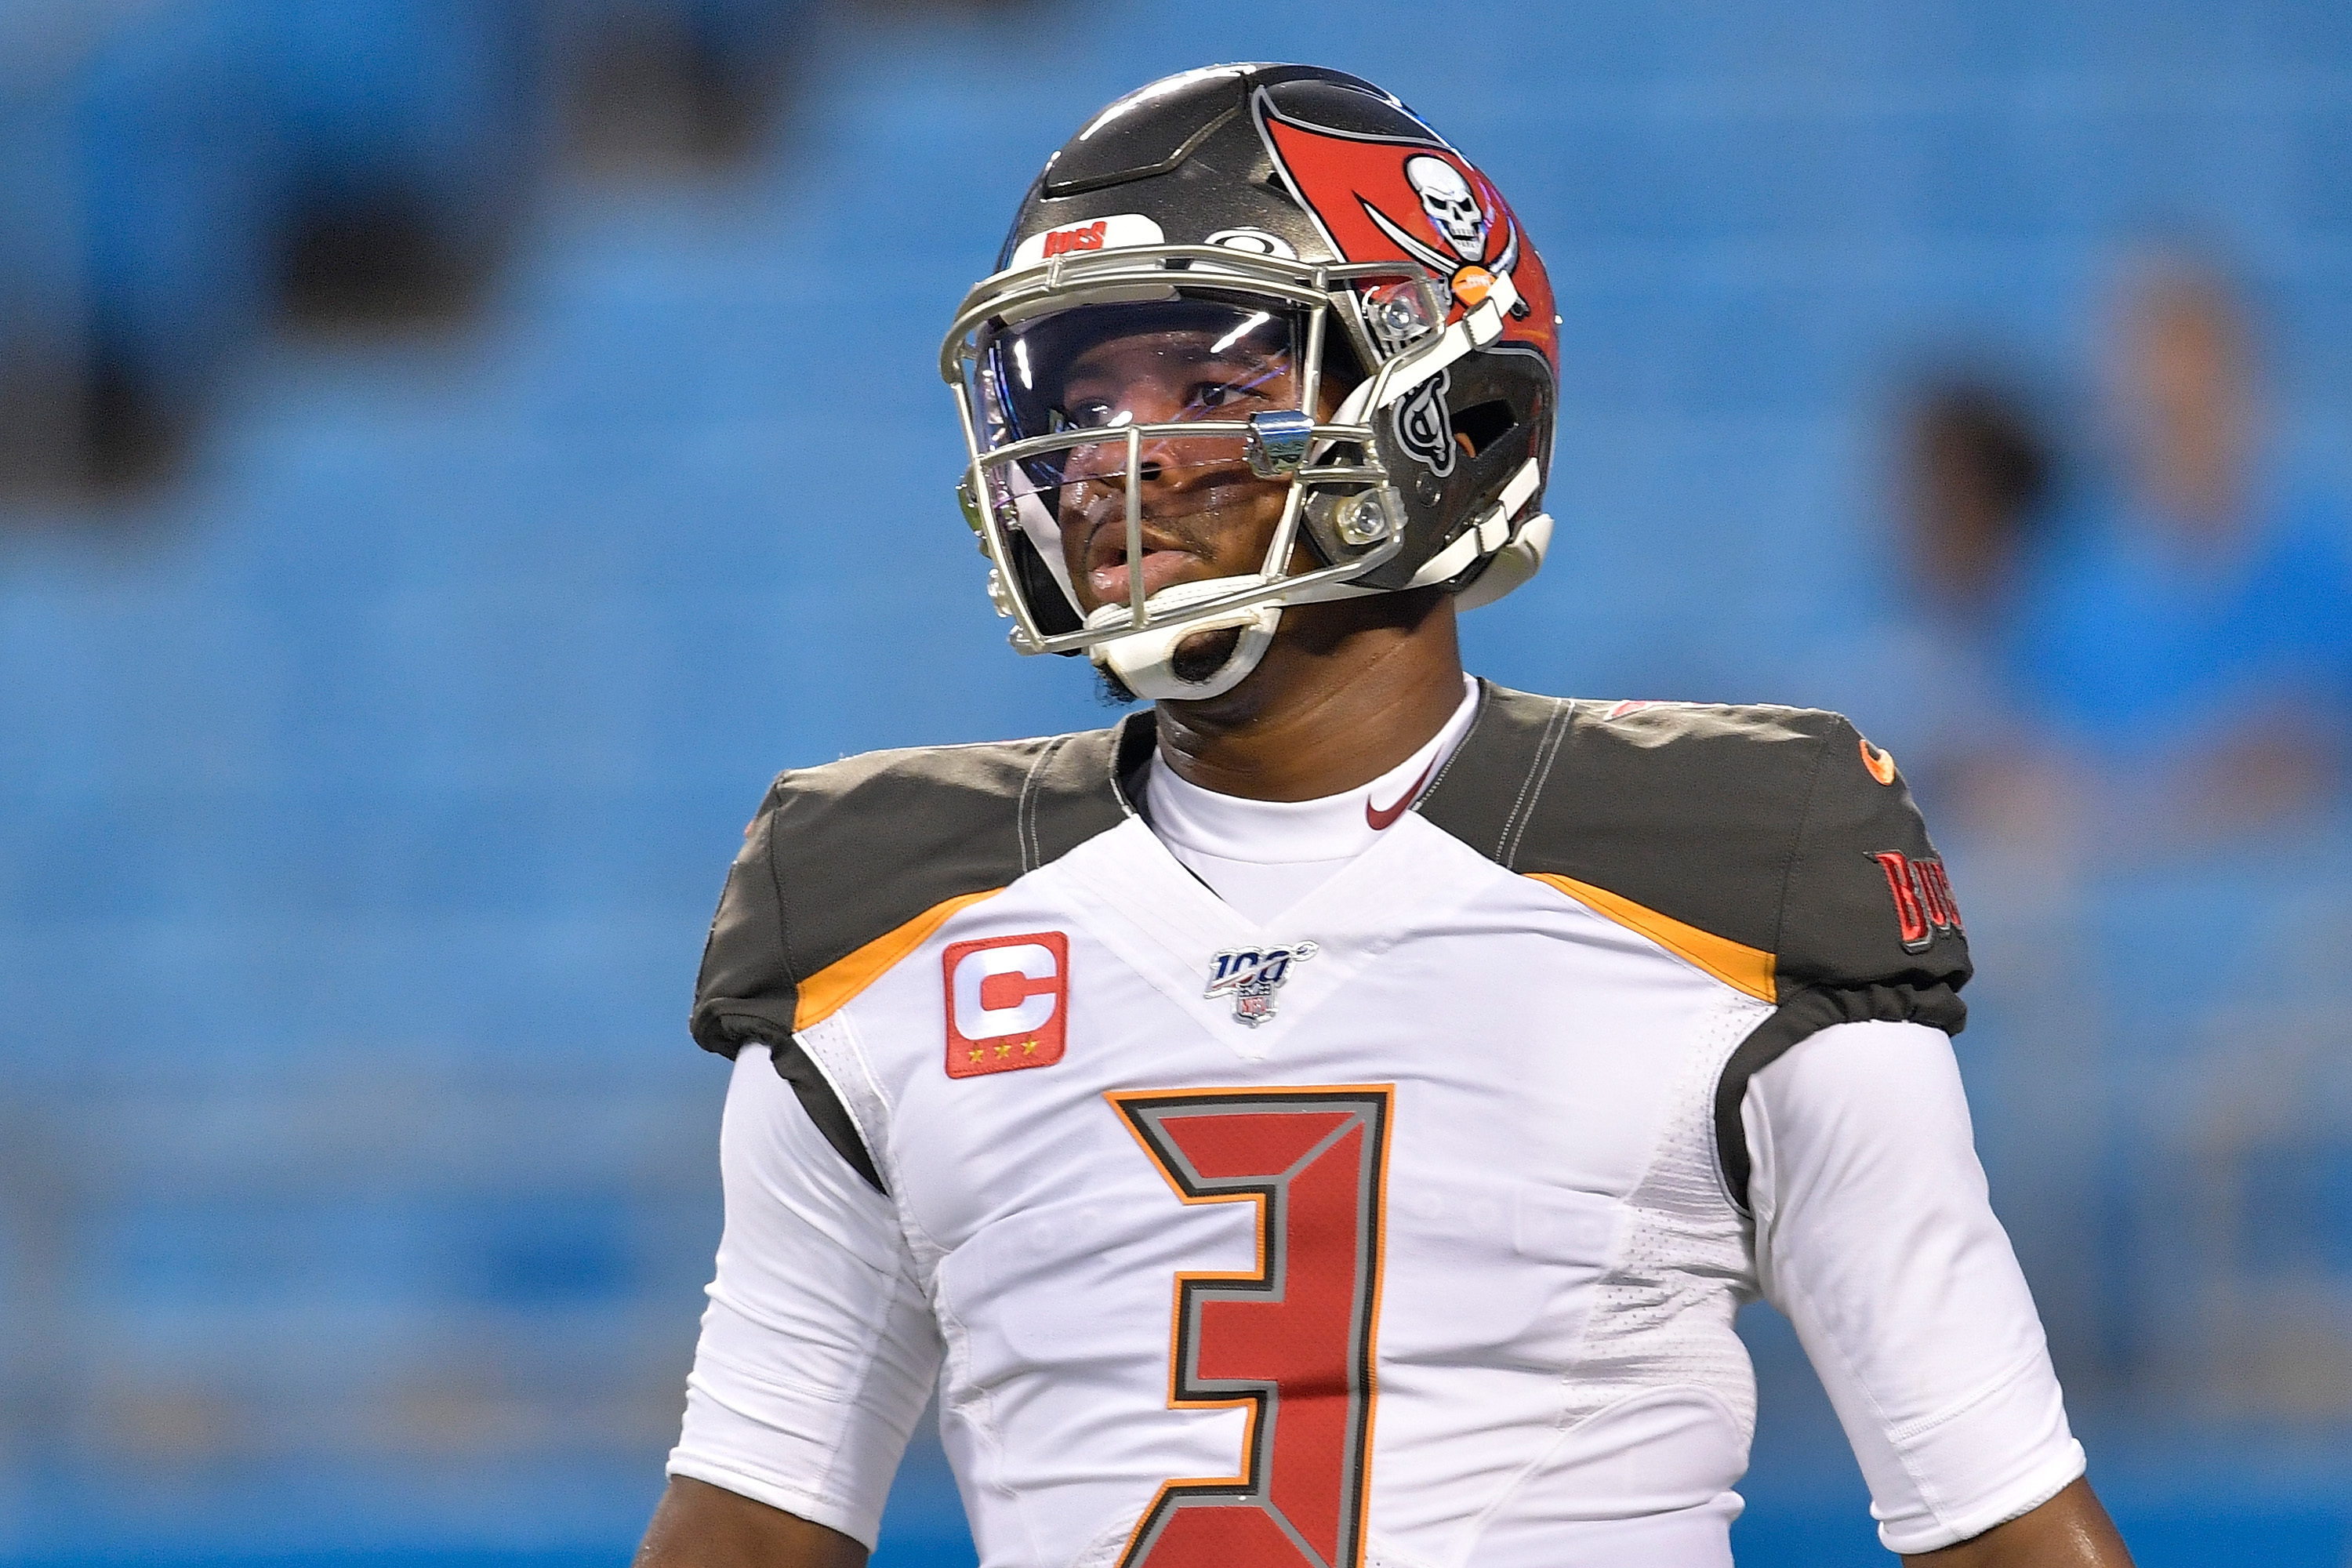 Jameis Winston Rumors: Latest on QB's Future in Tampa Bay After